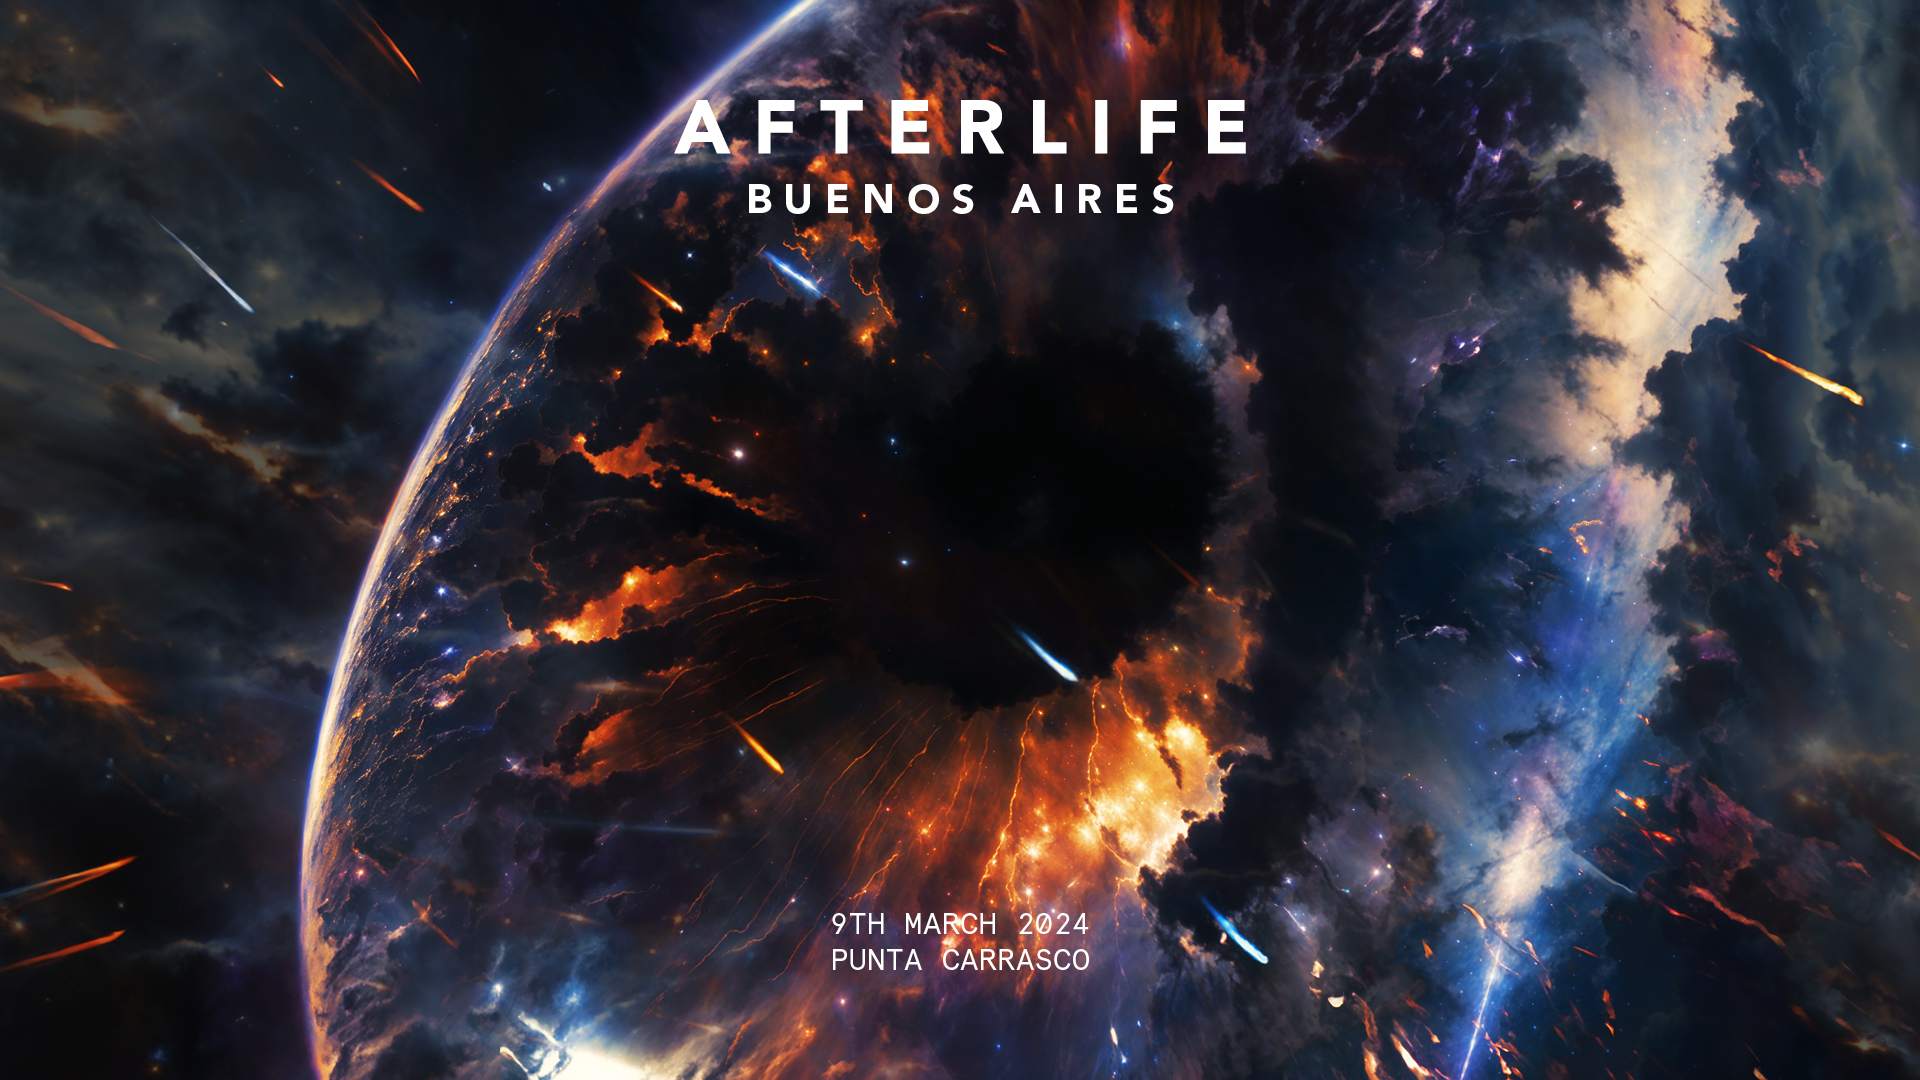 Afterlife Buenos Aires 2024 at Punta Carrasco, Buenos Aires